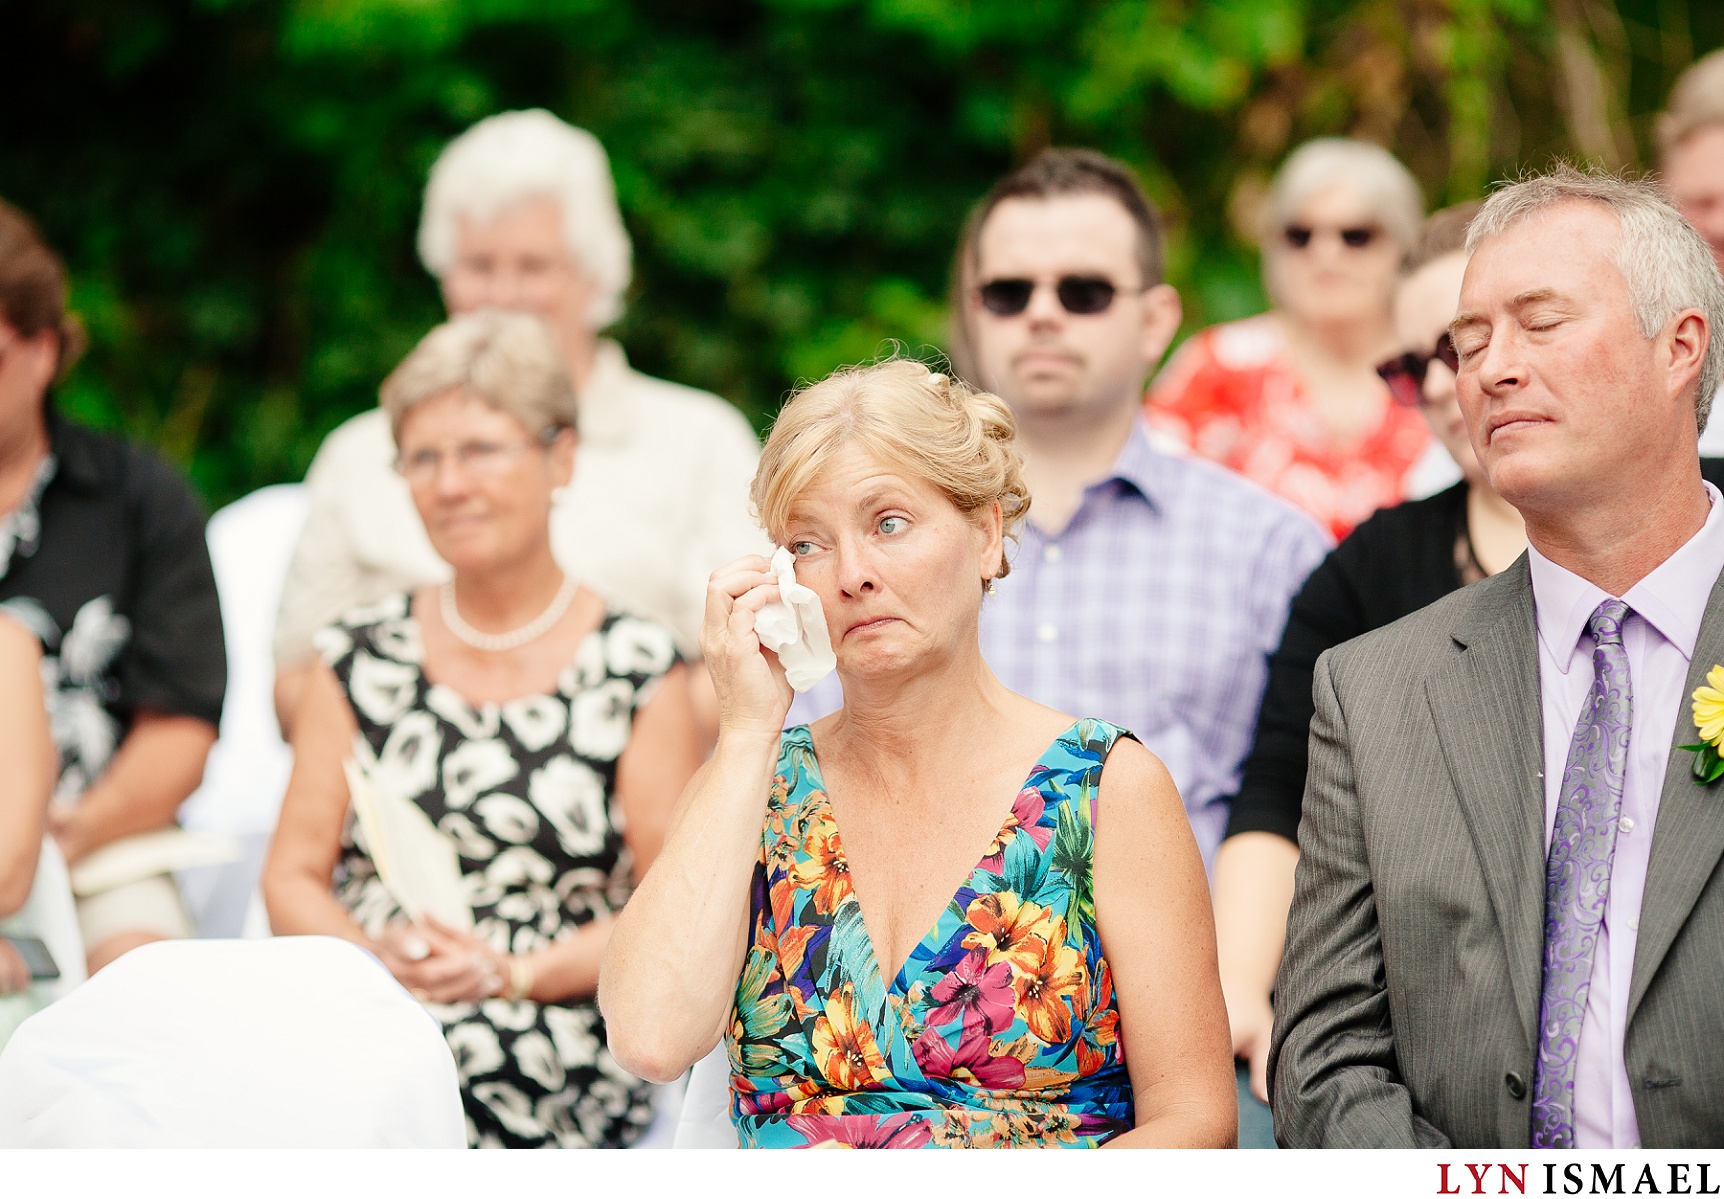 Groom's mom cries at his wedding.